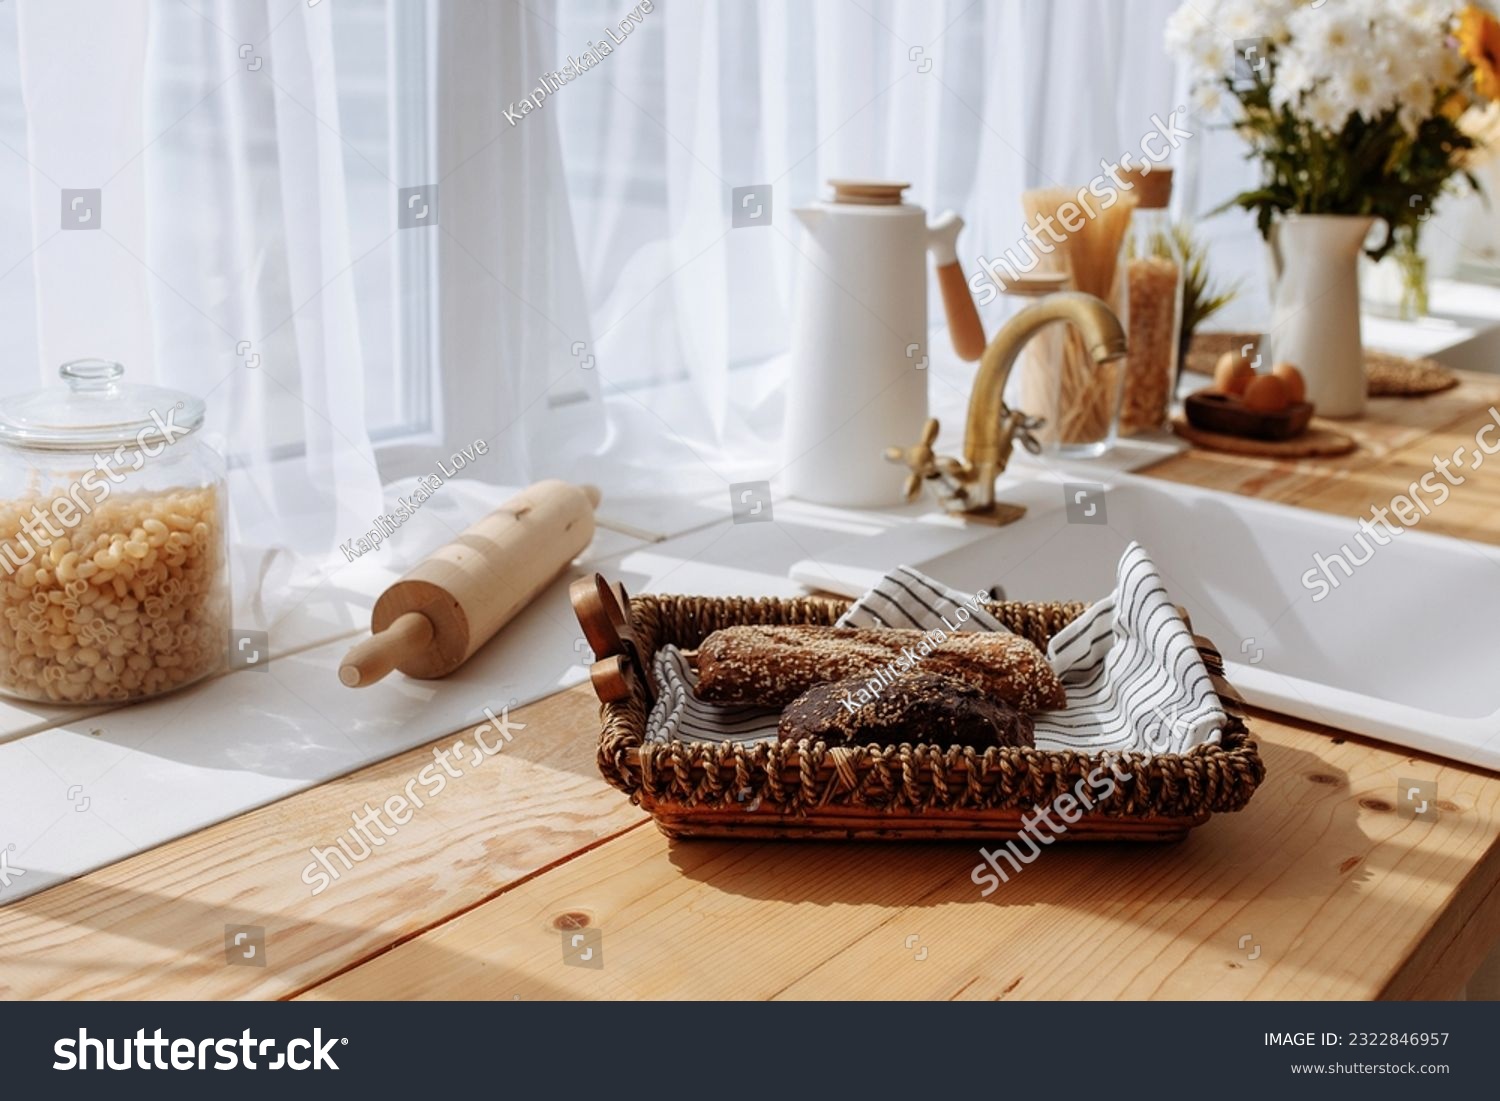 Fresh bread and utensils on the kitchen table, ready to be cooked. Simple modern scandinavian style kitchen, kitchen details, wooden table, bouquet of flowers in a vase on the table. #2322846957